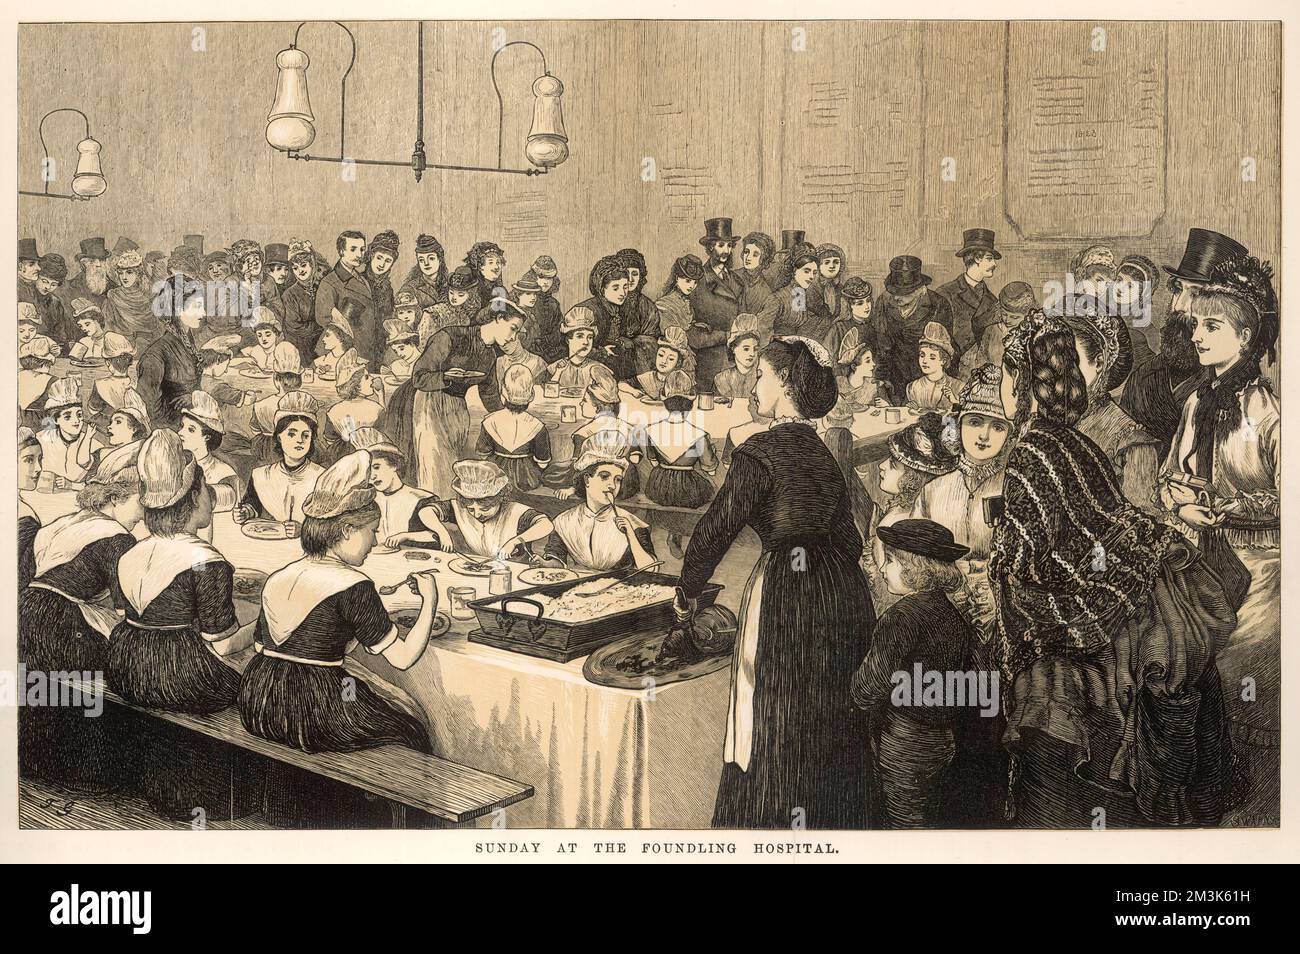 This is a scene on sunday at the Foundling Hospital where orphans are sitting down to a meal on long tables and being served by young women in aprons and caps. In the foreground, wealthy looking patrons appear to be witnessing the scene. Stock Photo